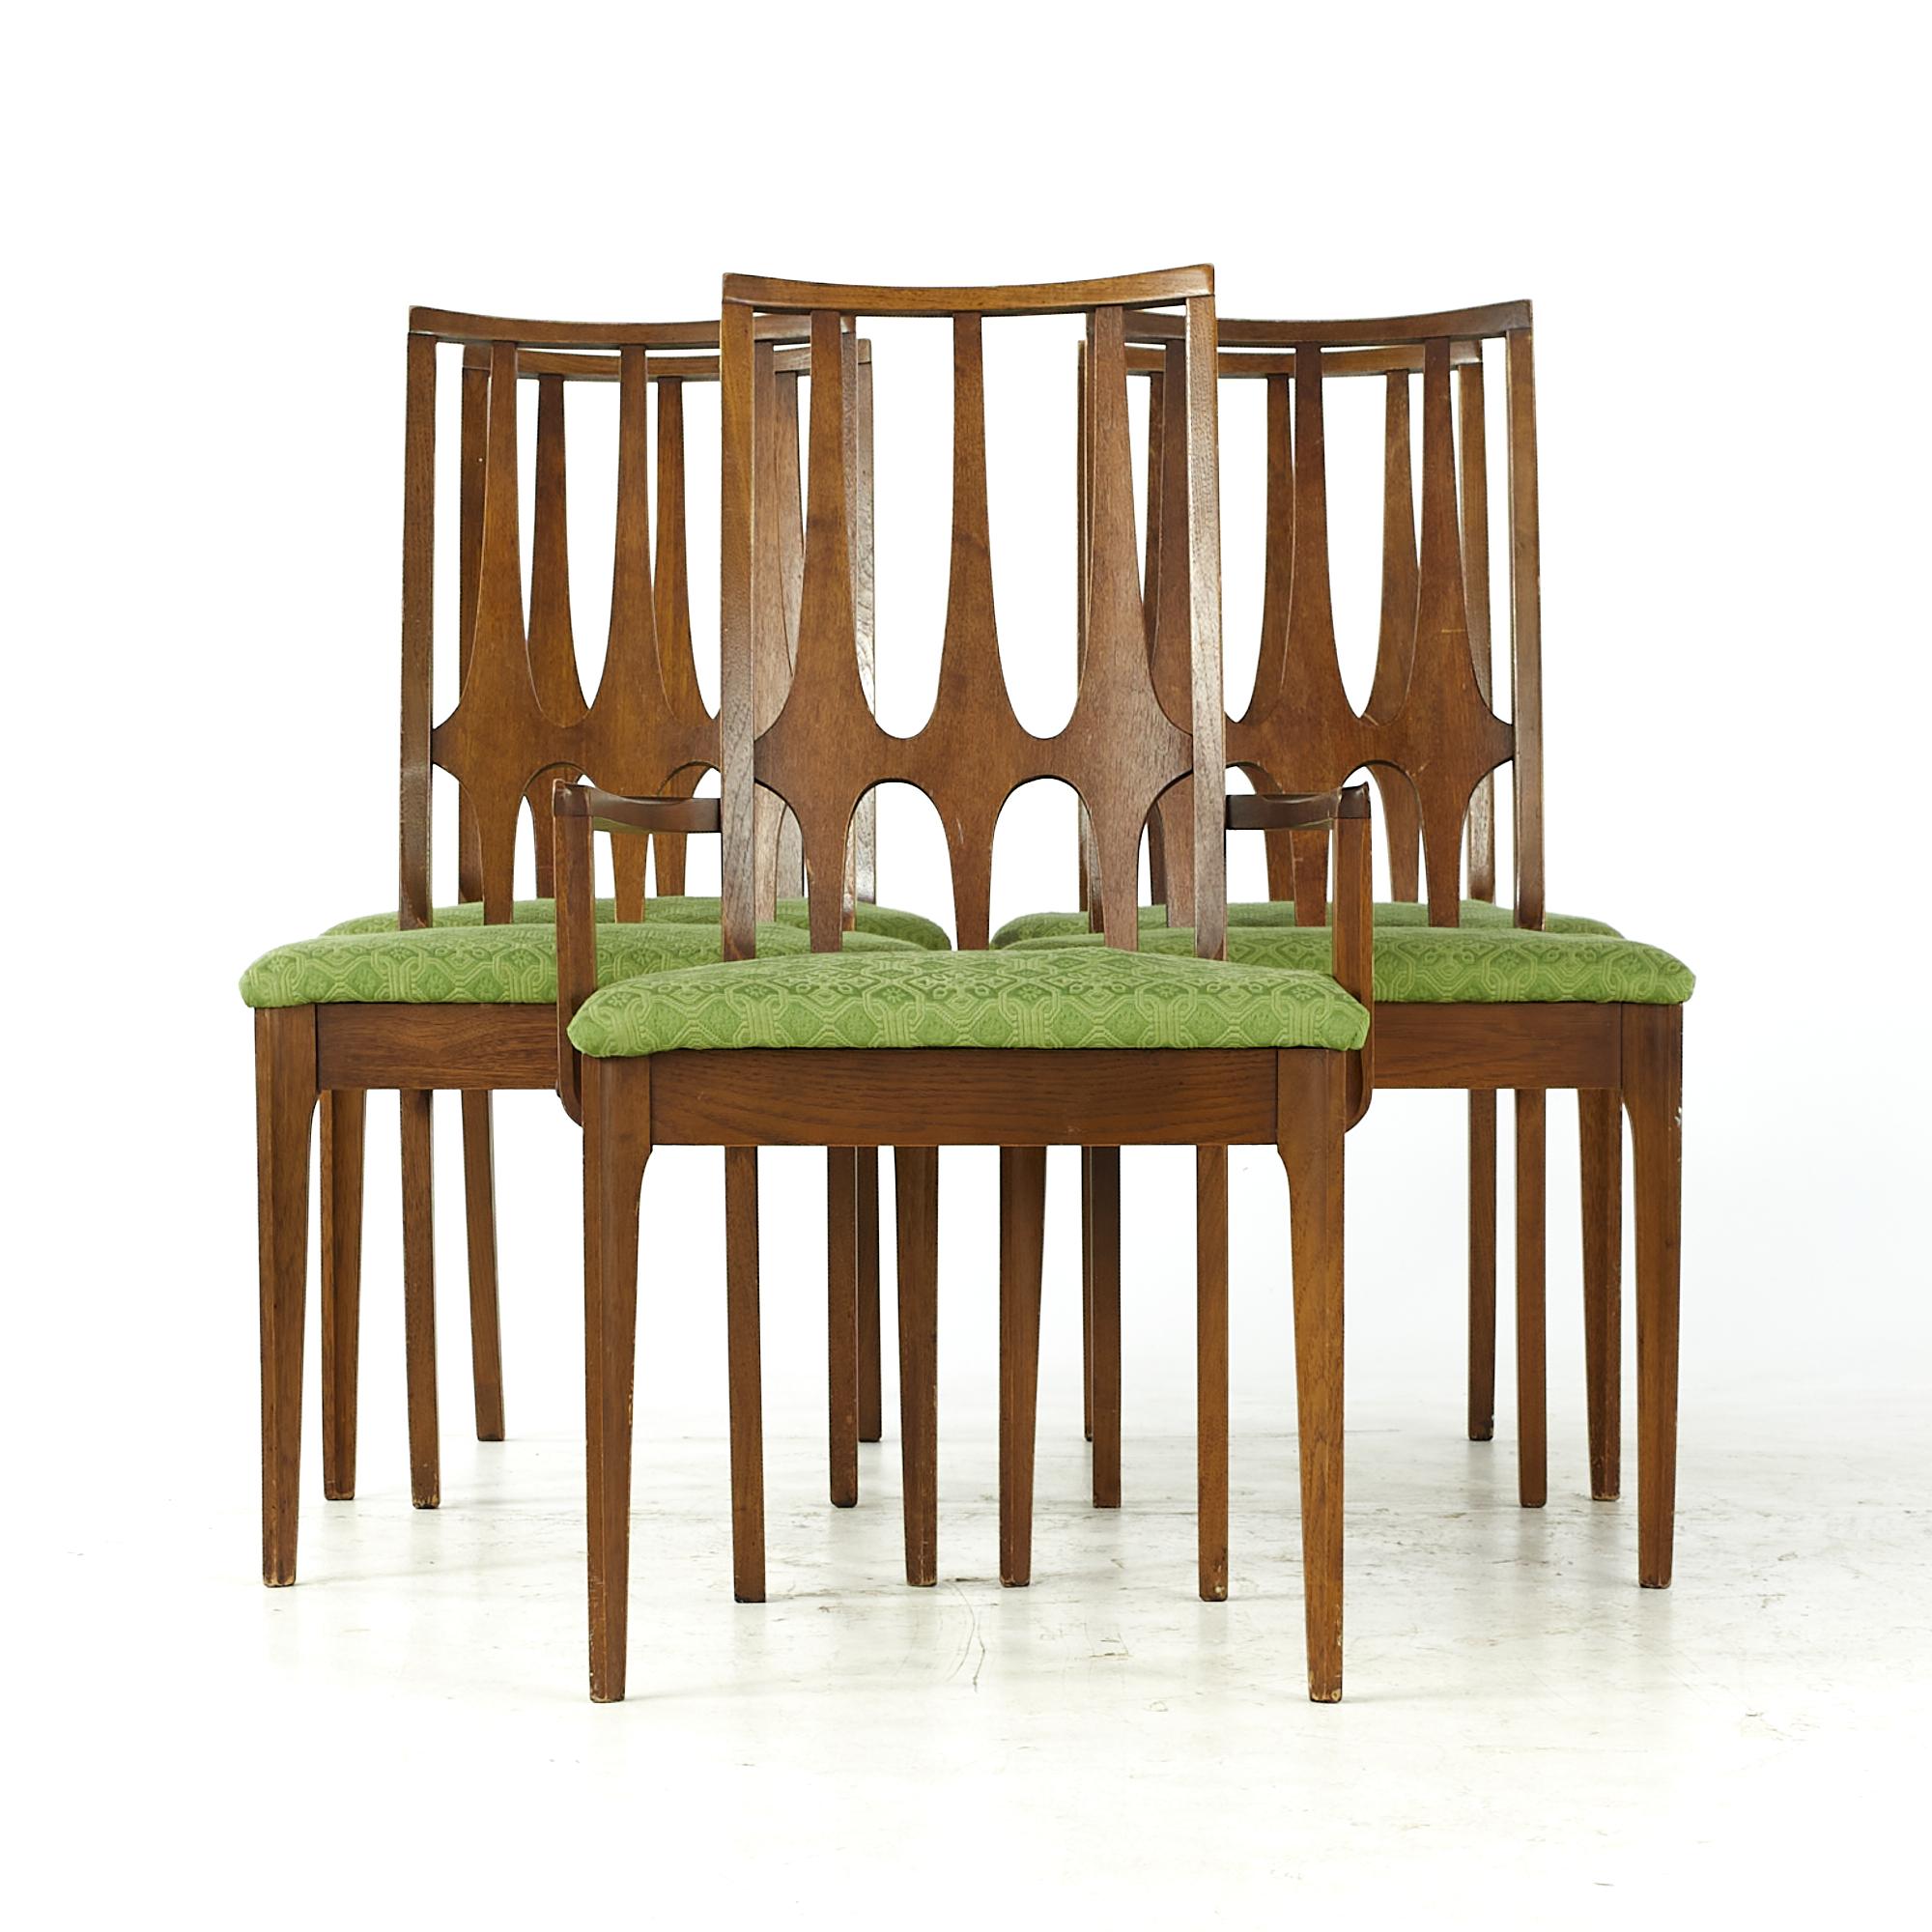 Broyhill Brasilia midcentury dining chairs with 1 captain - set of 5

Each armless chair measures: 21 wide x 20.5 deep x 37 high, with a seat height of 19 inches
The captains chair measures: 21 wide x 20.5 deep x 37 high, with a seat height of 19